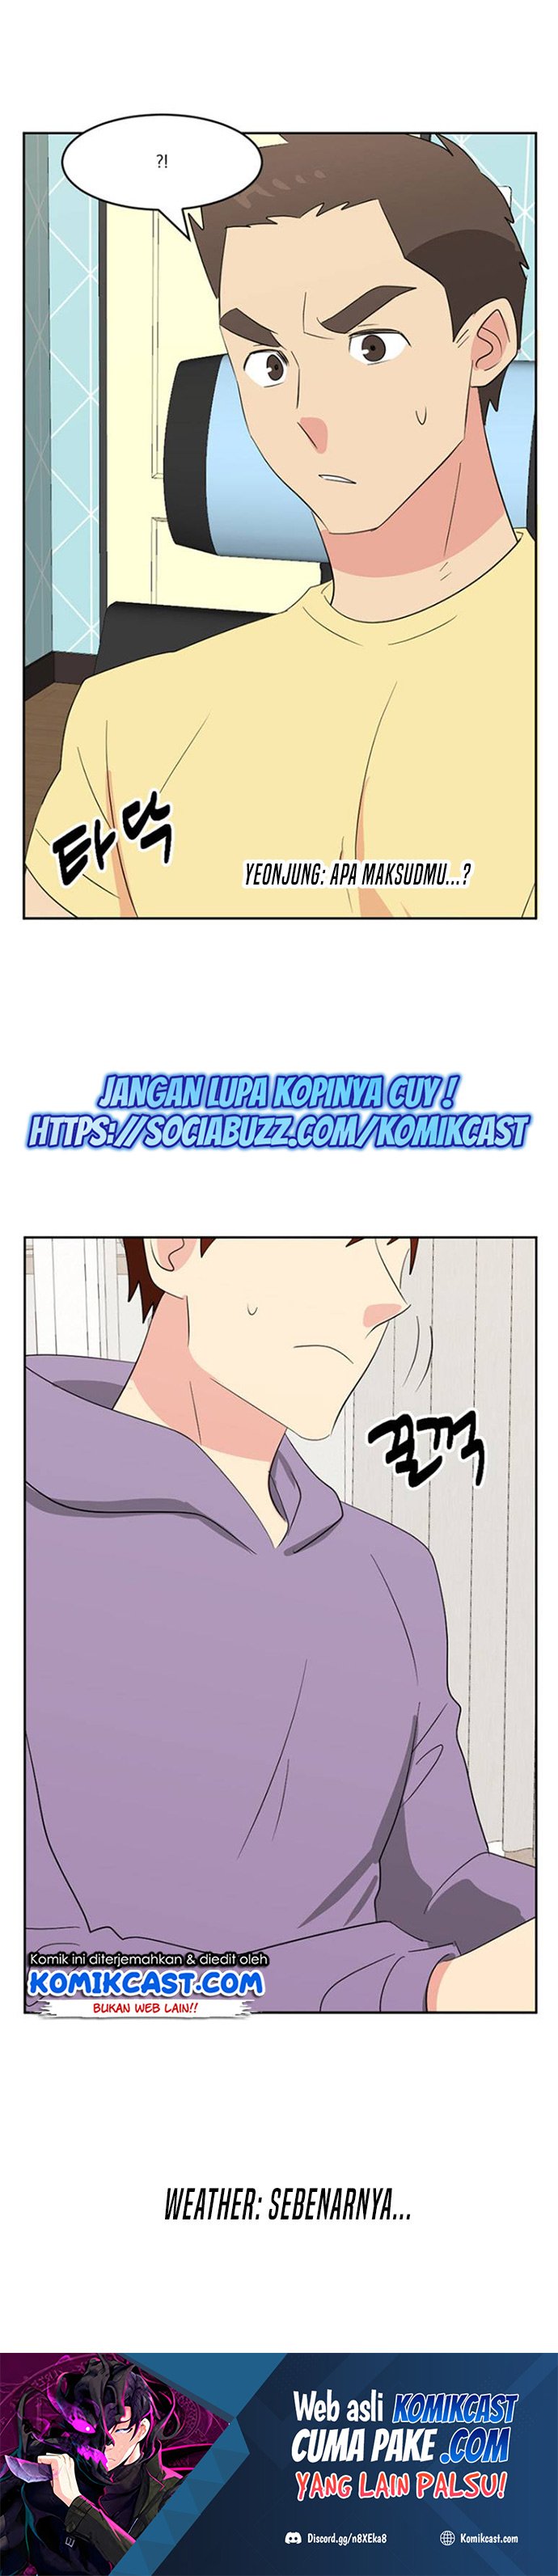 Bookworm Chapter 145